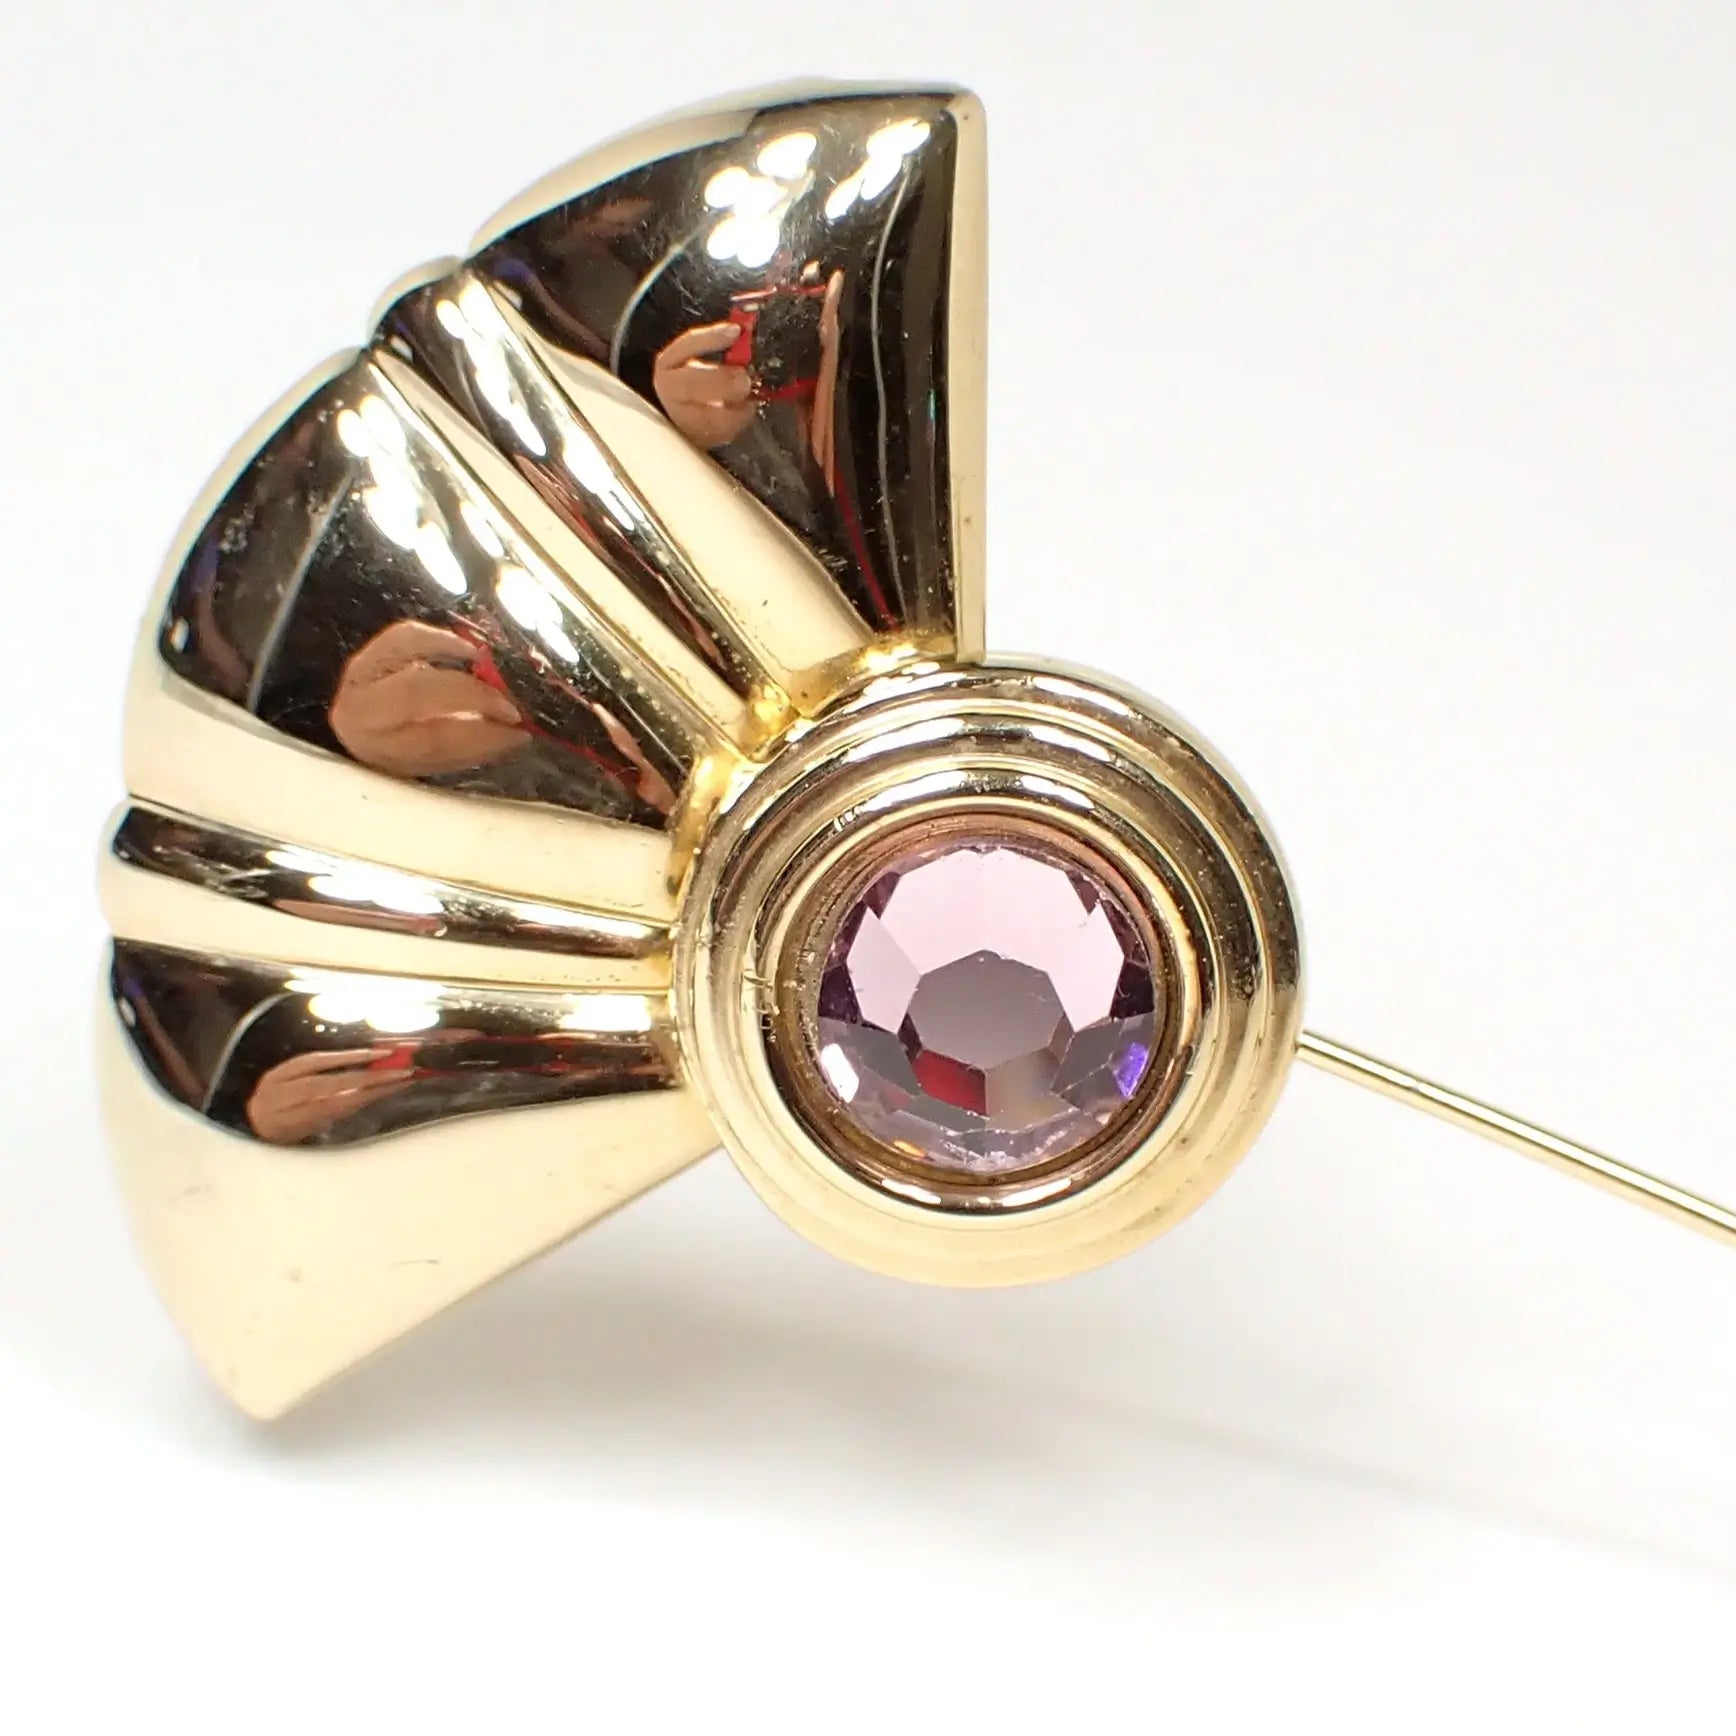 Enlarged view of the top of the retro vintage stick pin. It has a fan like shape on top that has a scalloped edge. Below that is a round area with a flat back rhinestone that is very light purple in color but has hues of pink as you move around and depending on the lighting.